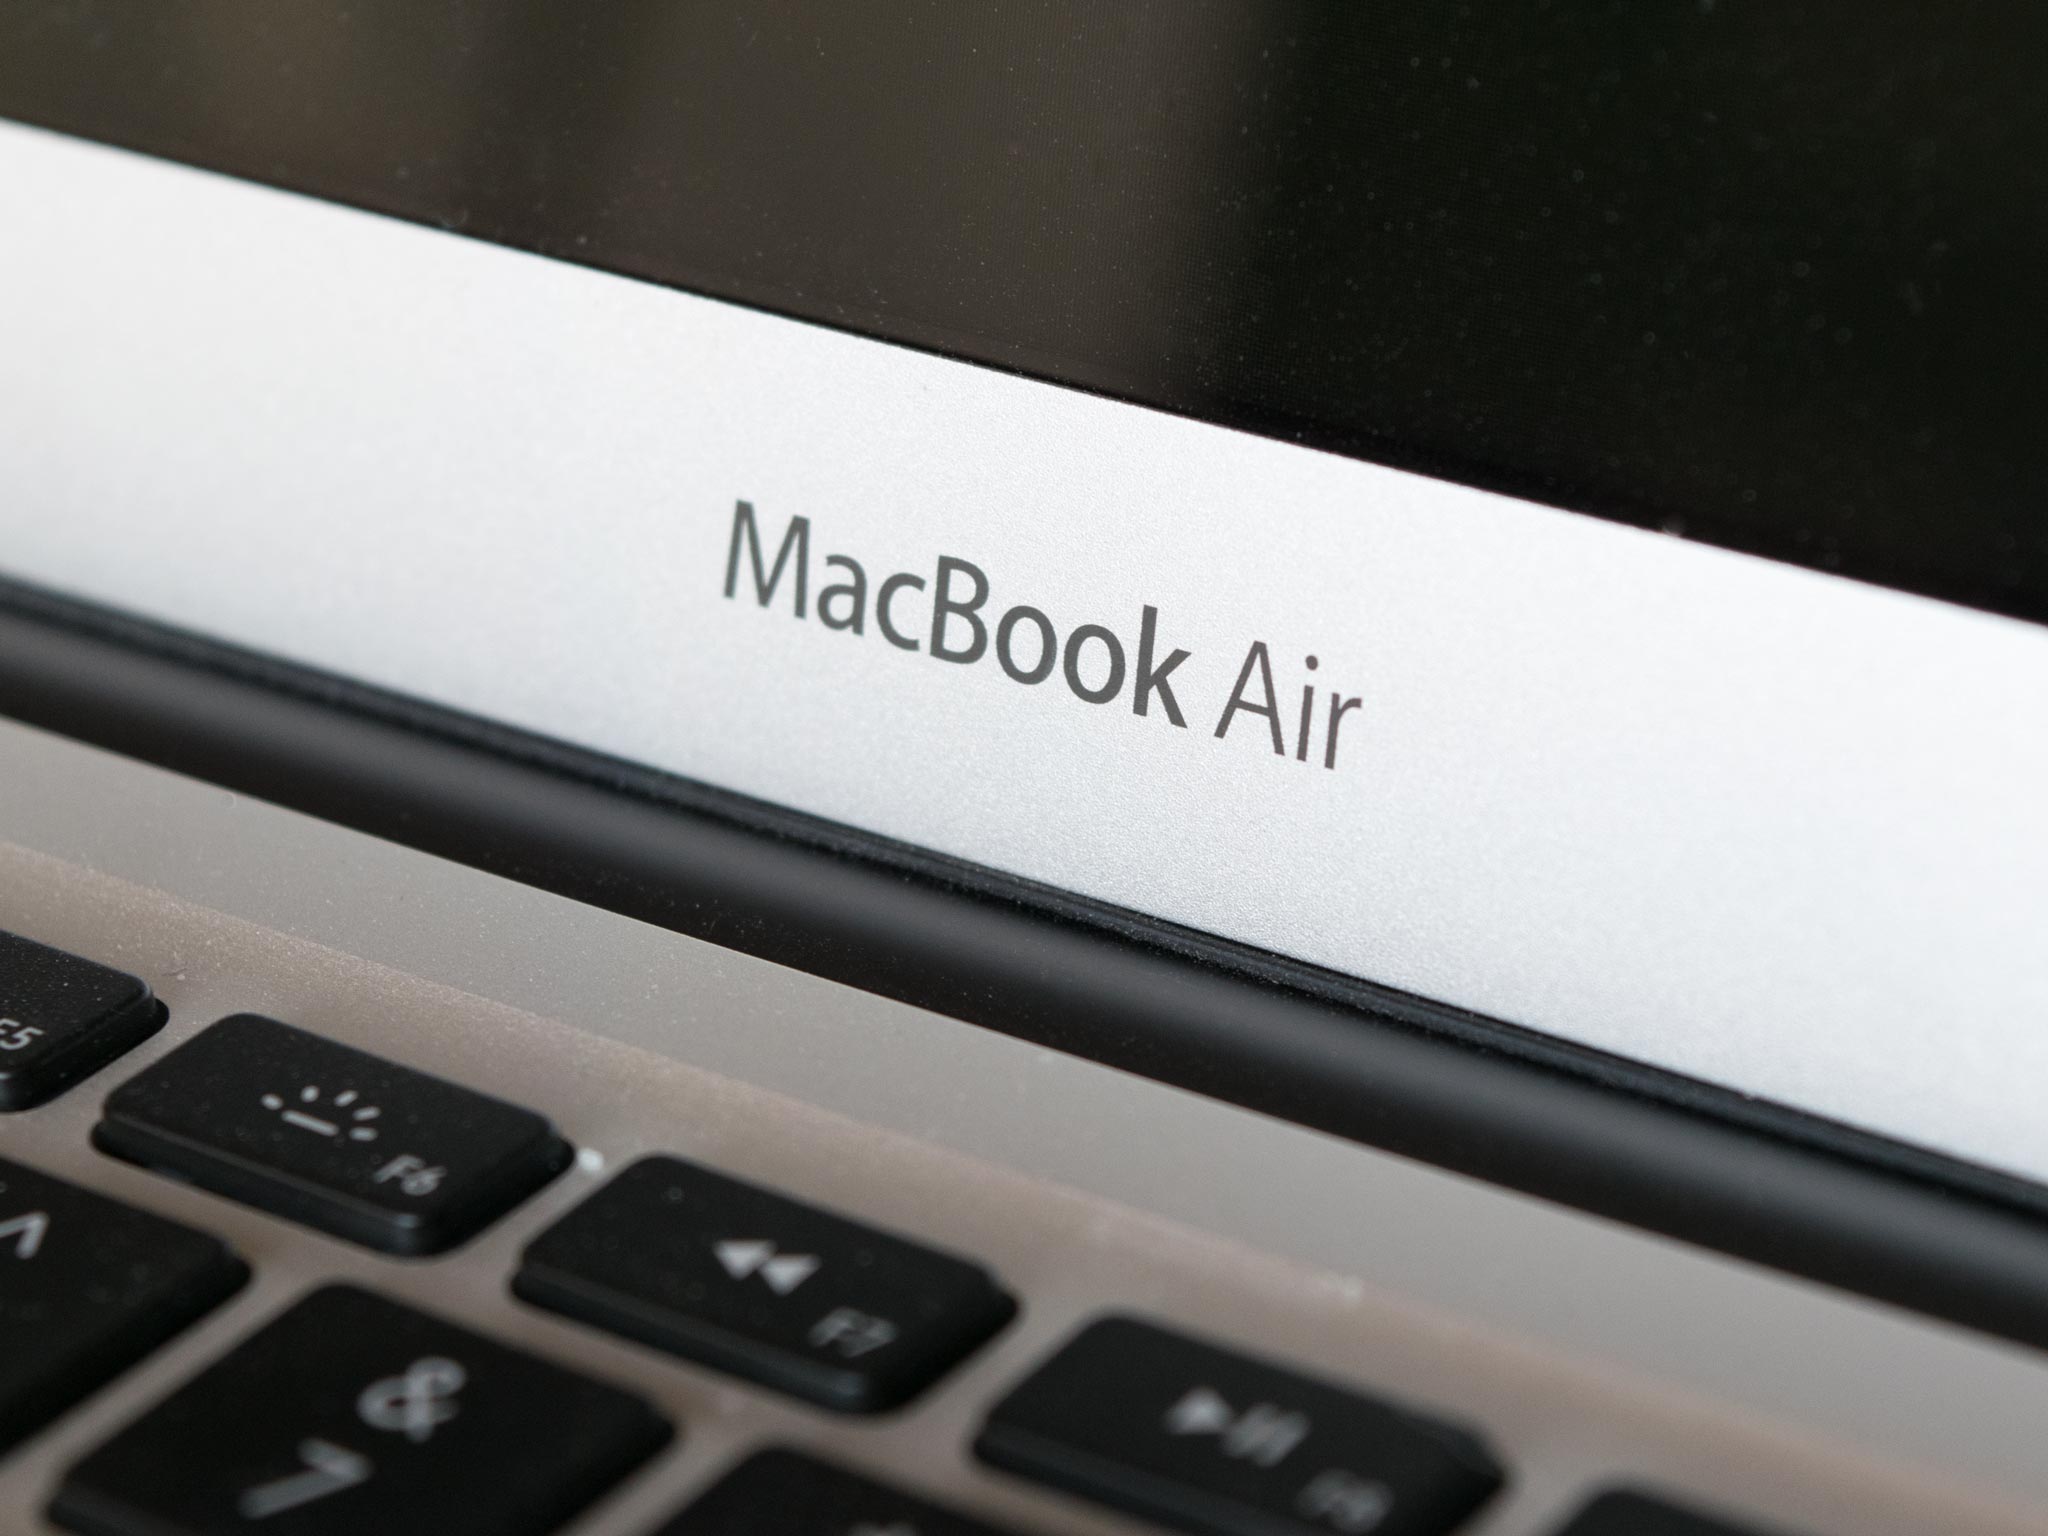 Apple reportedly planning major redesign for next MacBook Air